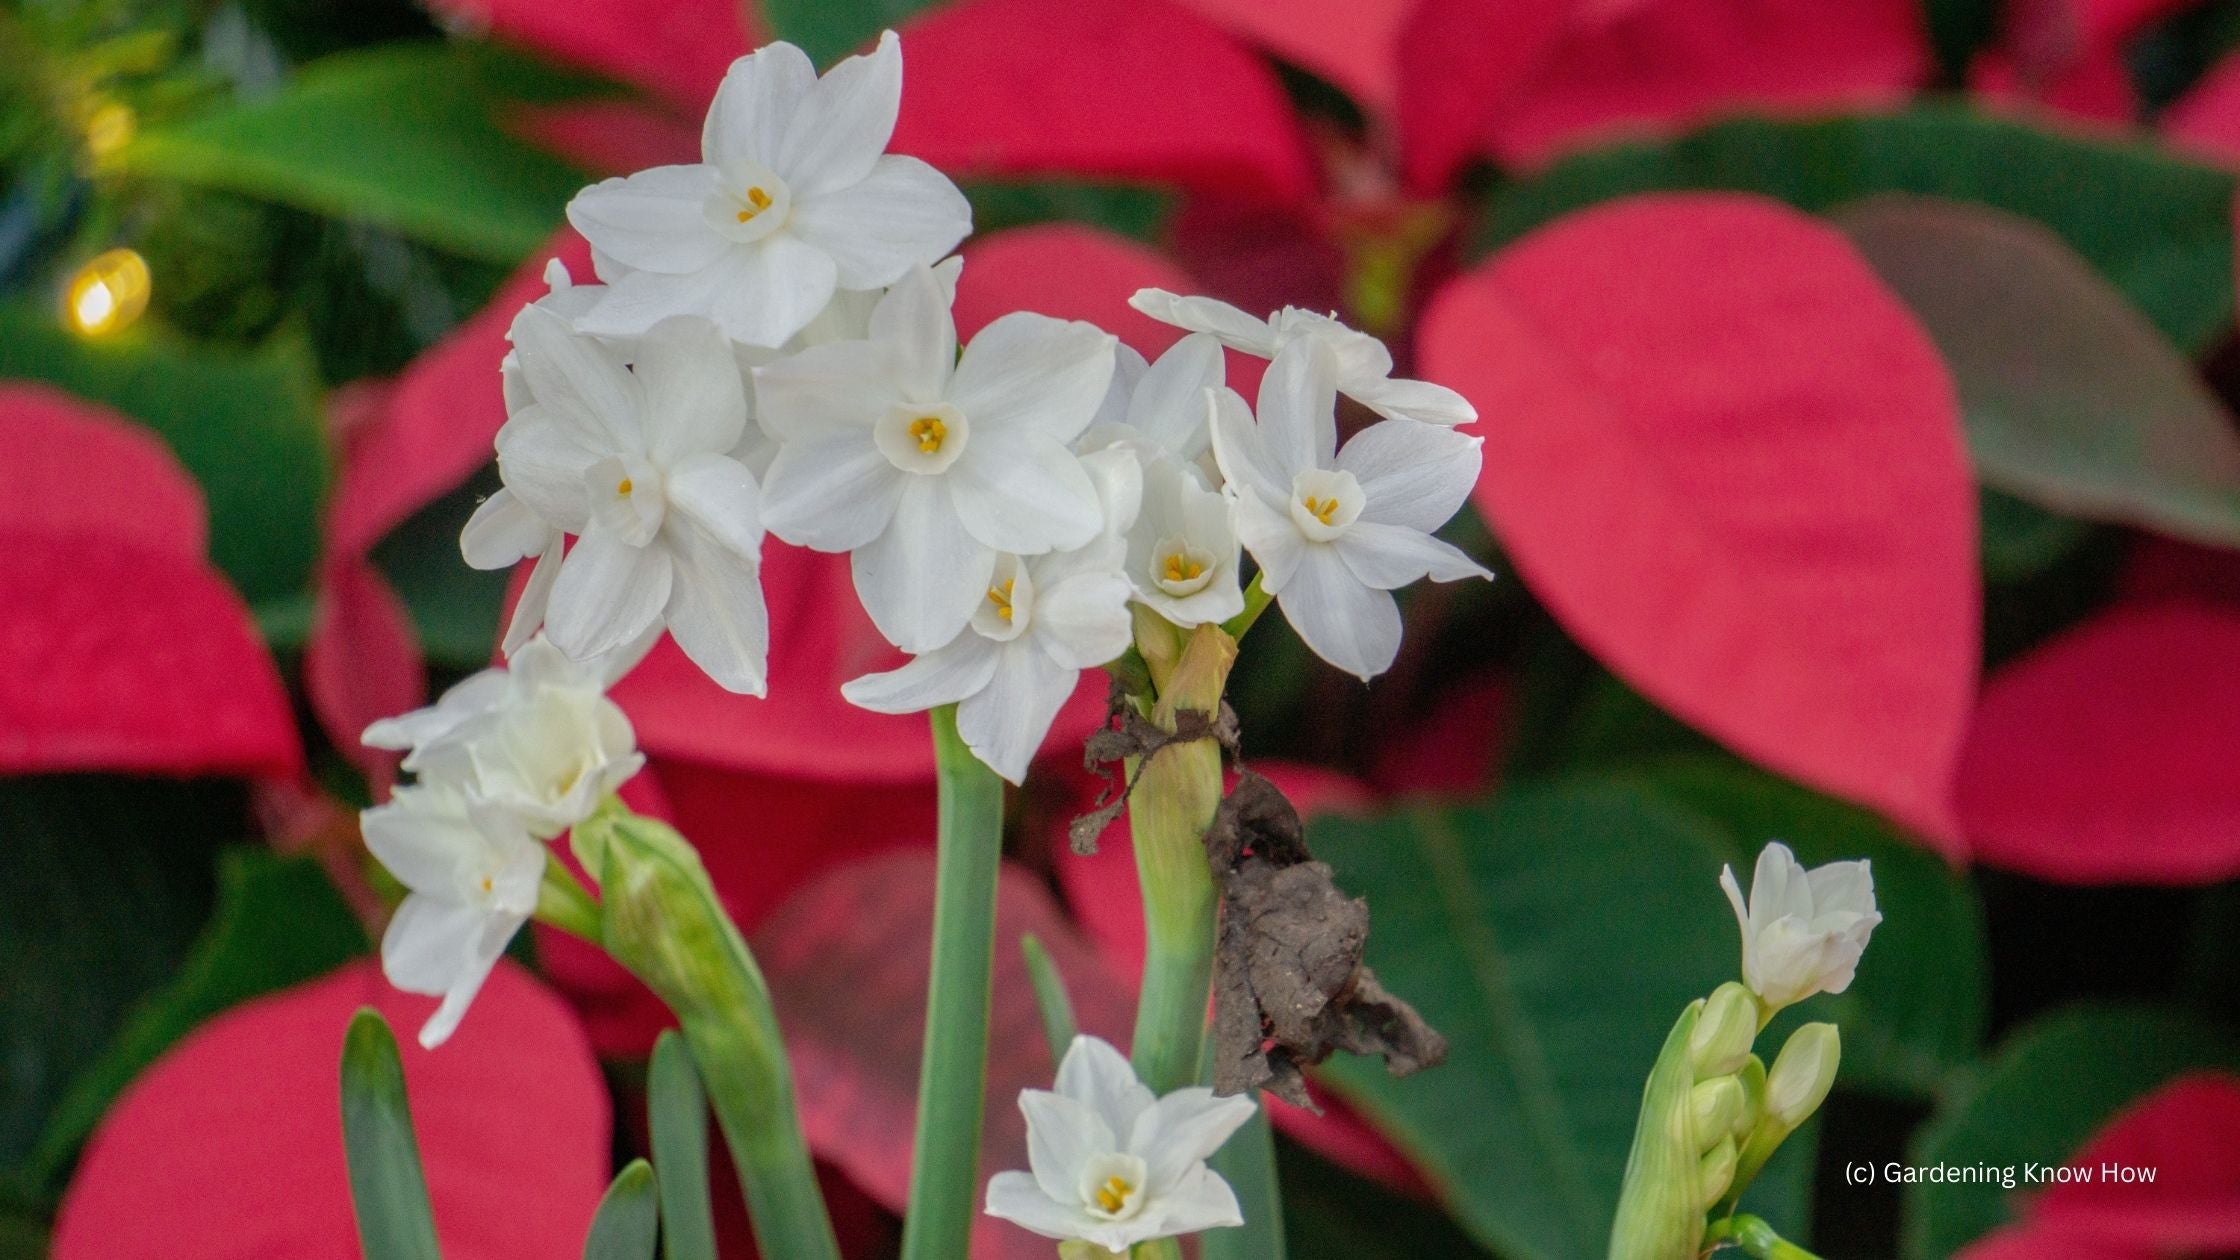 Paperwhites in front of Poinsettia